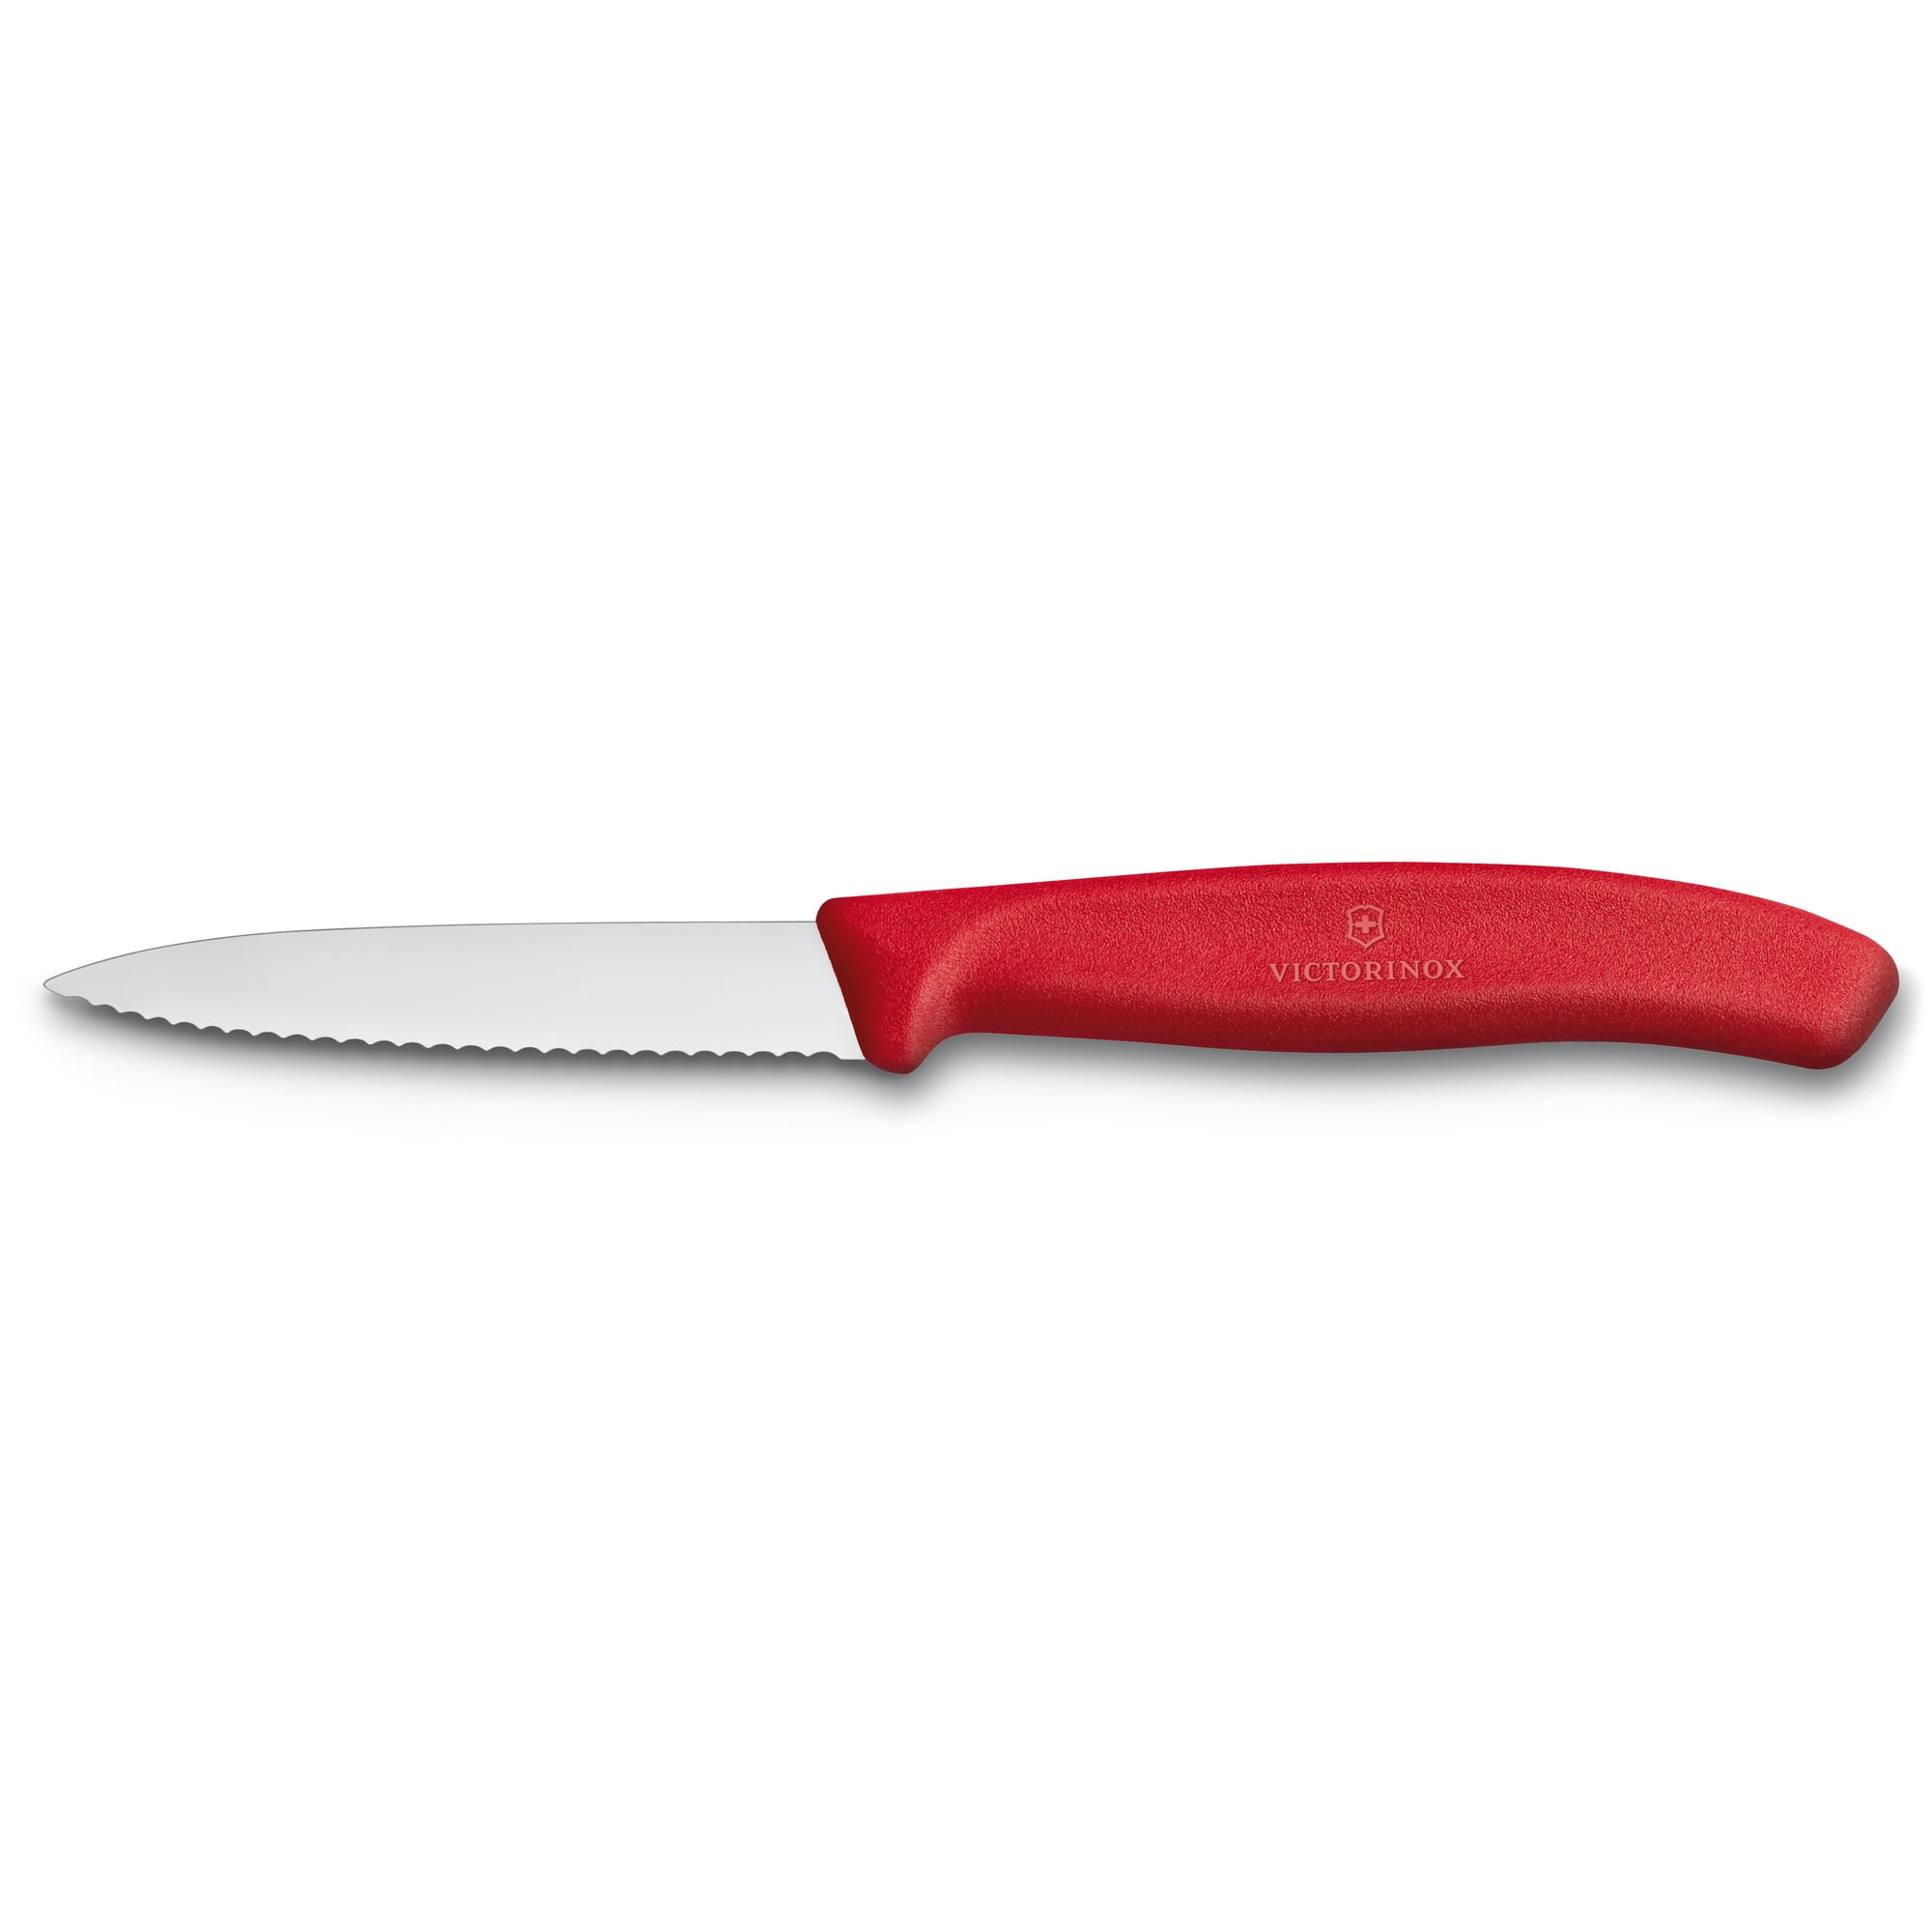  Victorinox Swiss Classic Foldable Paring Knife, Wavy Edge Red  4.3 in: Home & Kitchen